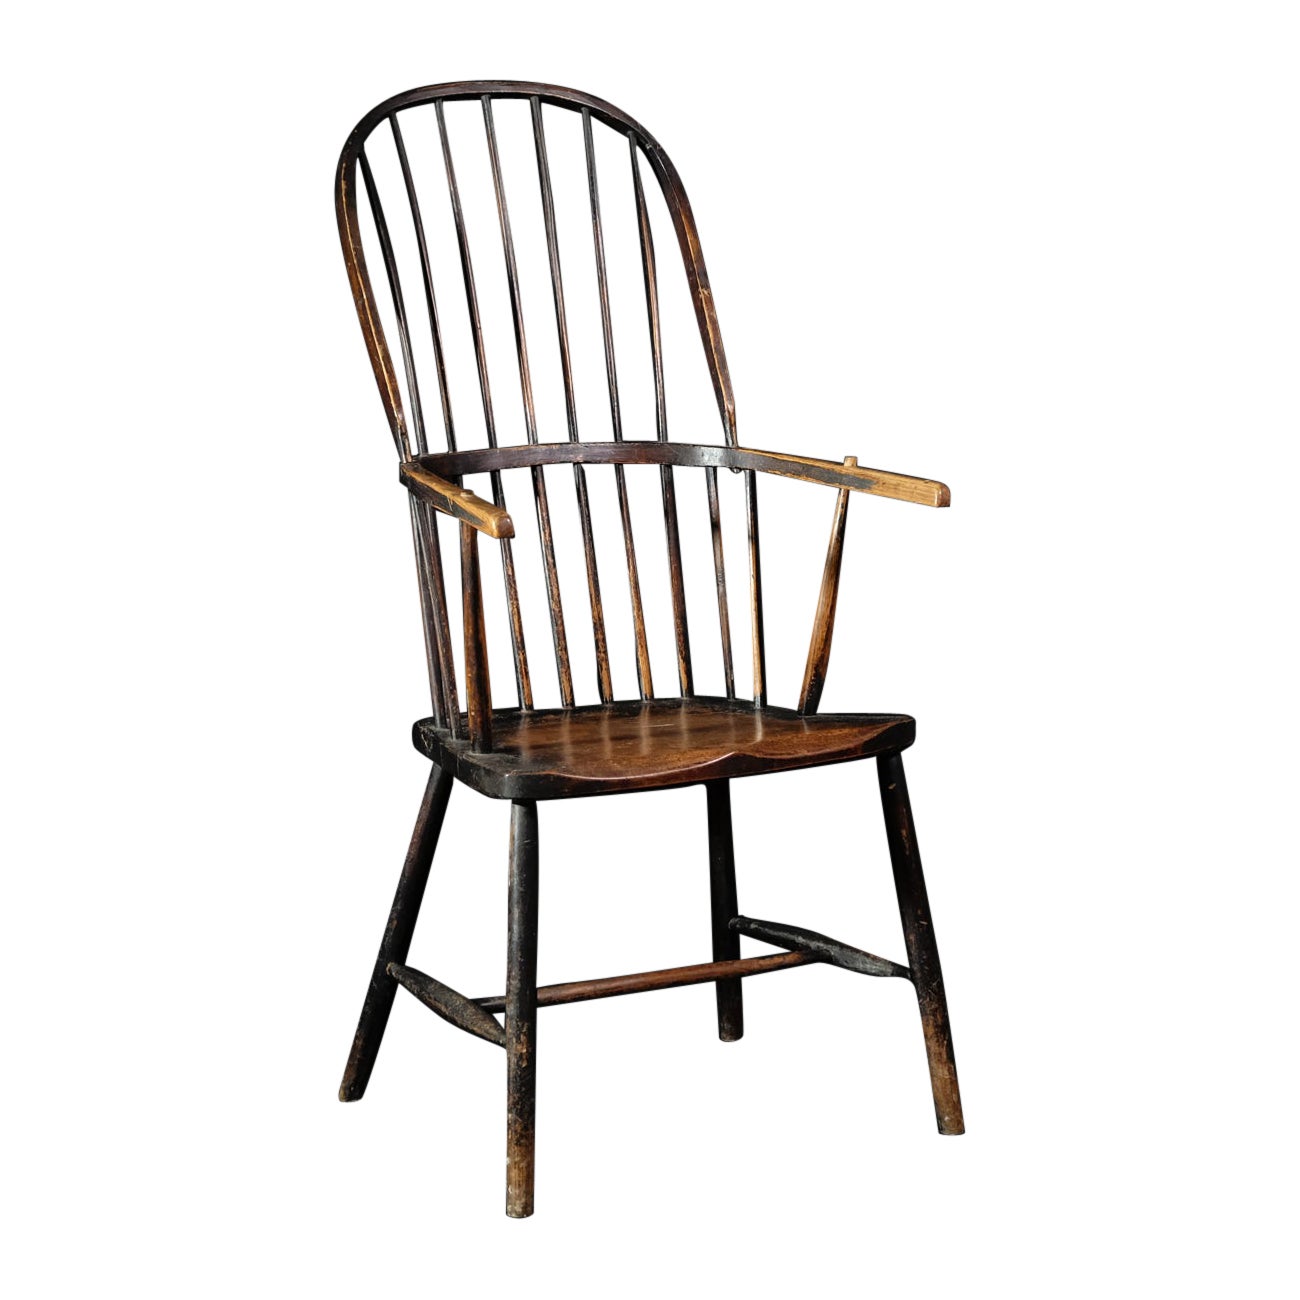 Early 19th Century Cornish English West Country Windsor Stick Chair, Farmhouse